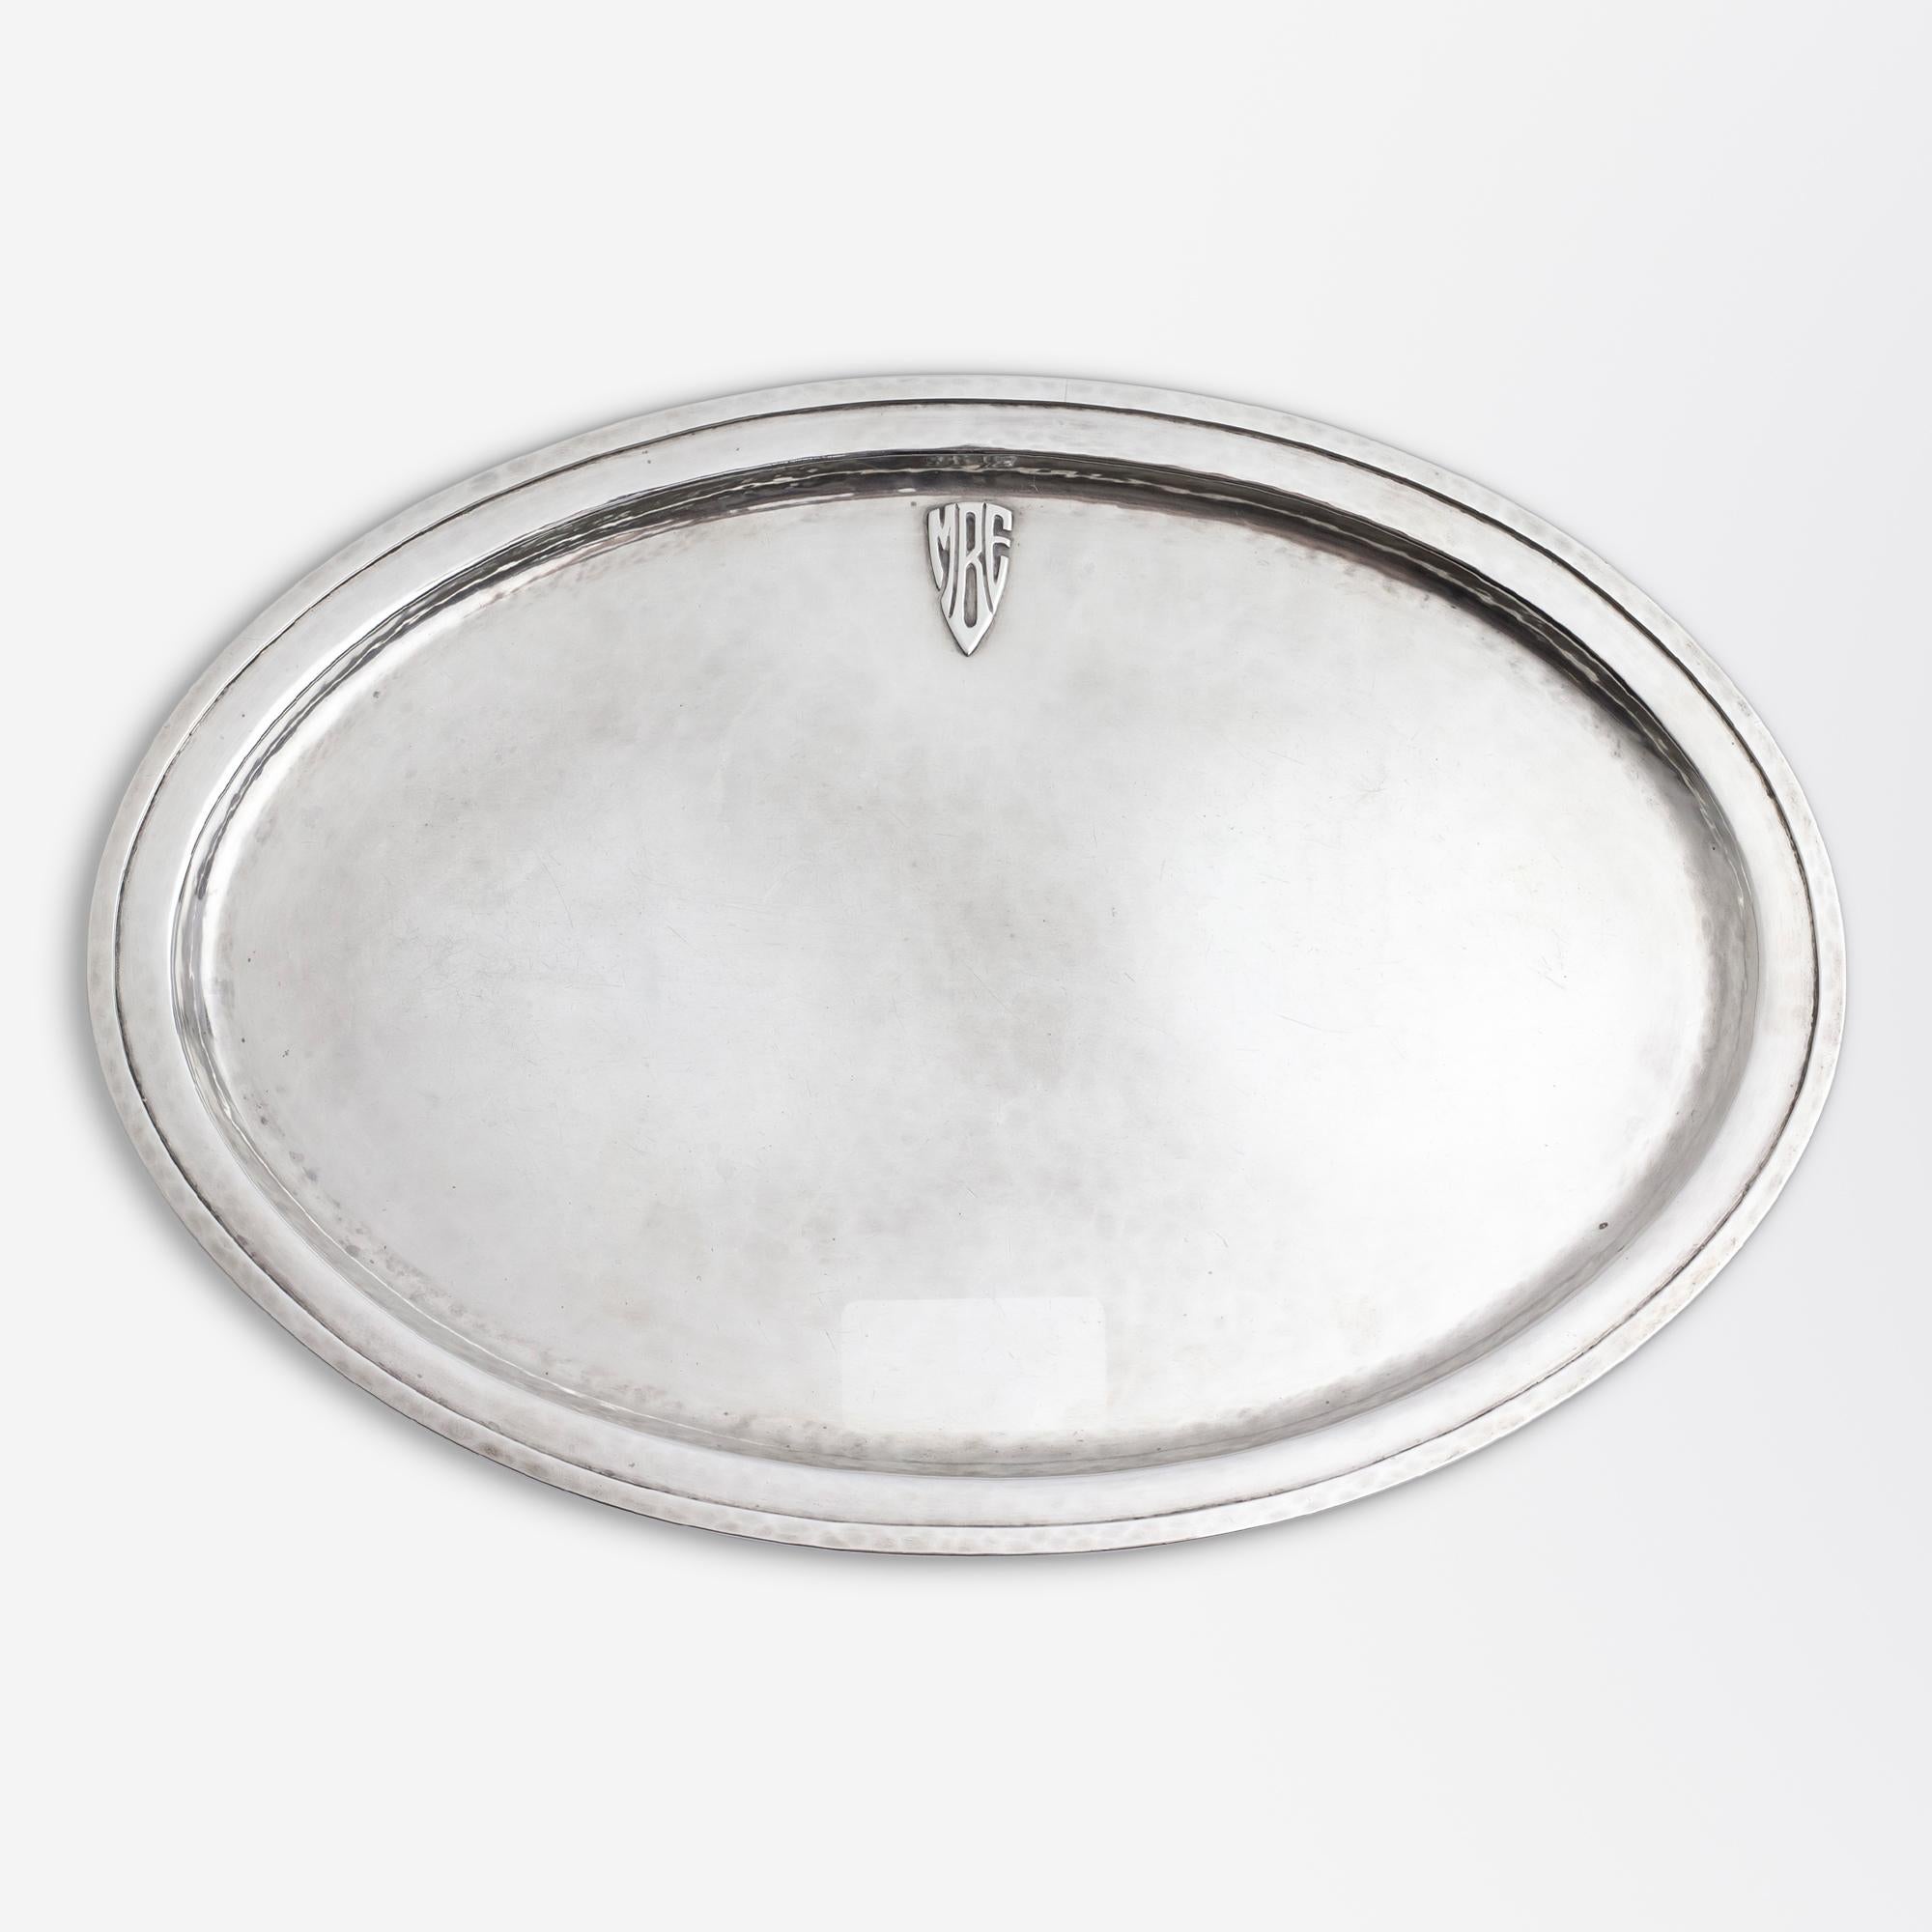 This hand wrought sterling silver sugar and creamer with matched oval tray is crafted by Chicago maker, Lebolt & Company. The three piece set dates to the American 'Arts & Crafts' period of the early 20th Century and features a period monogram of